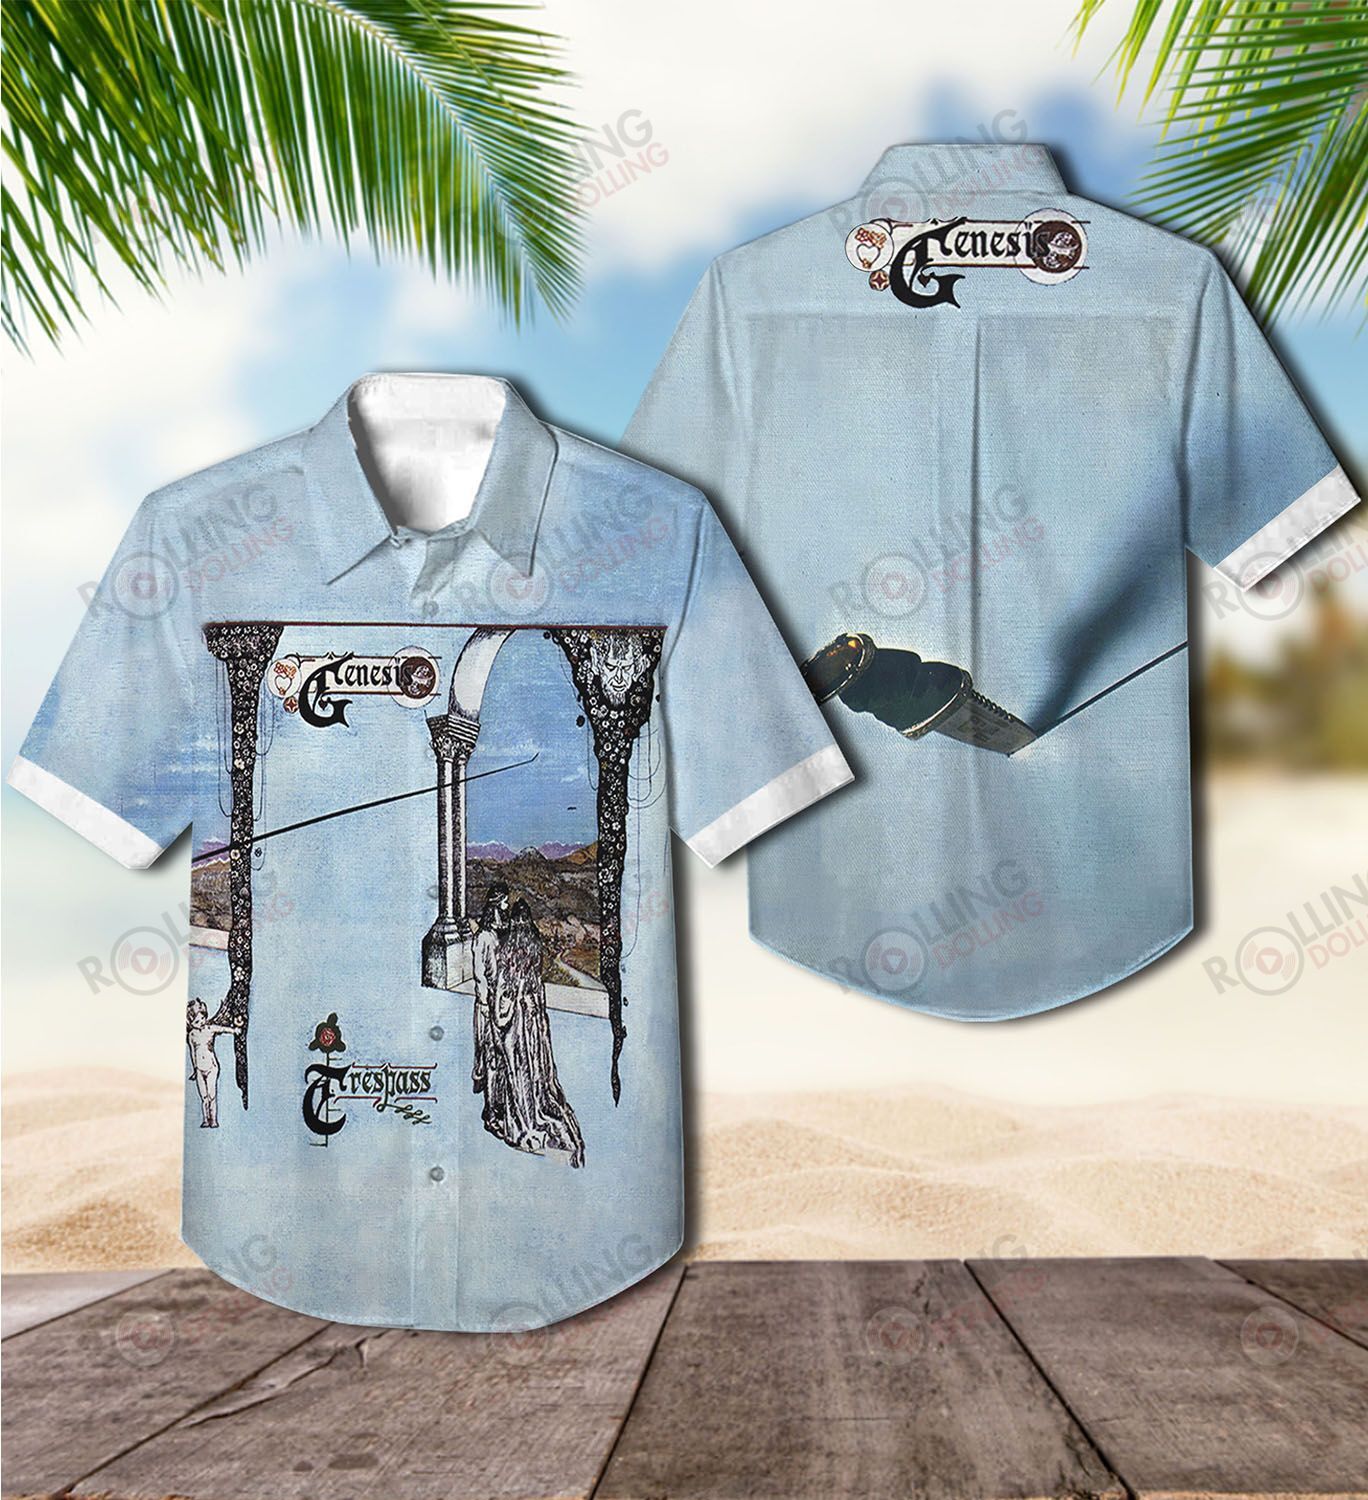 You'll have the perfect vacation outfit with this Hawaiian shirt 403